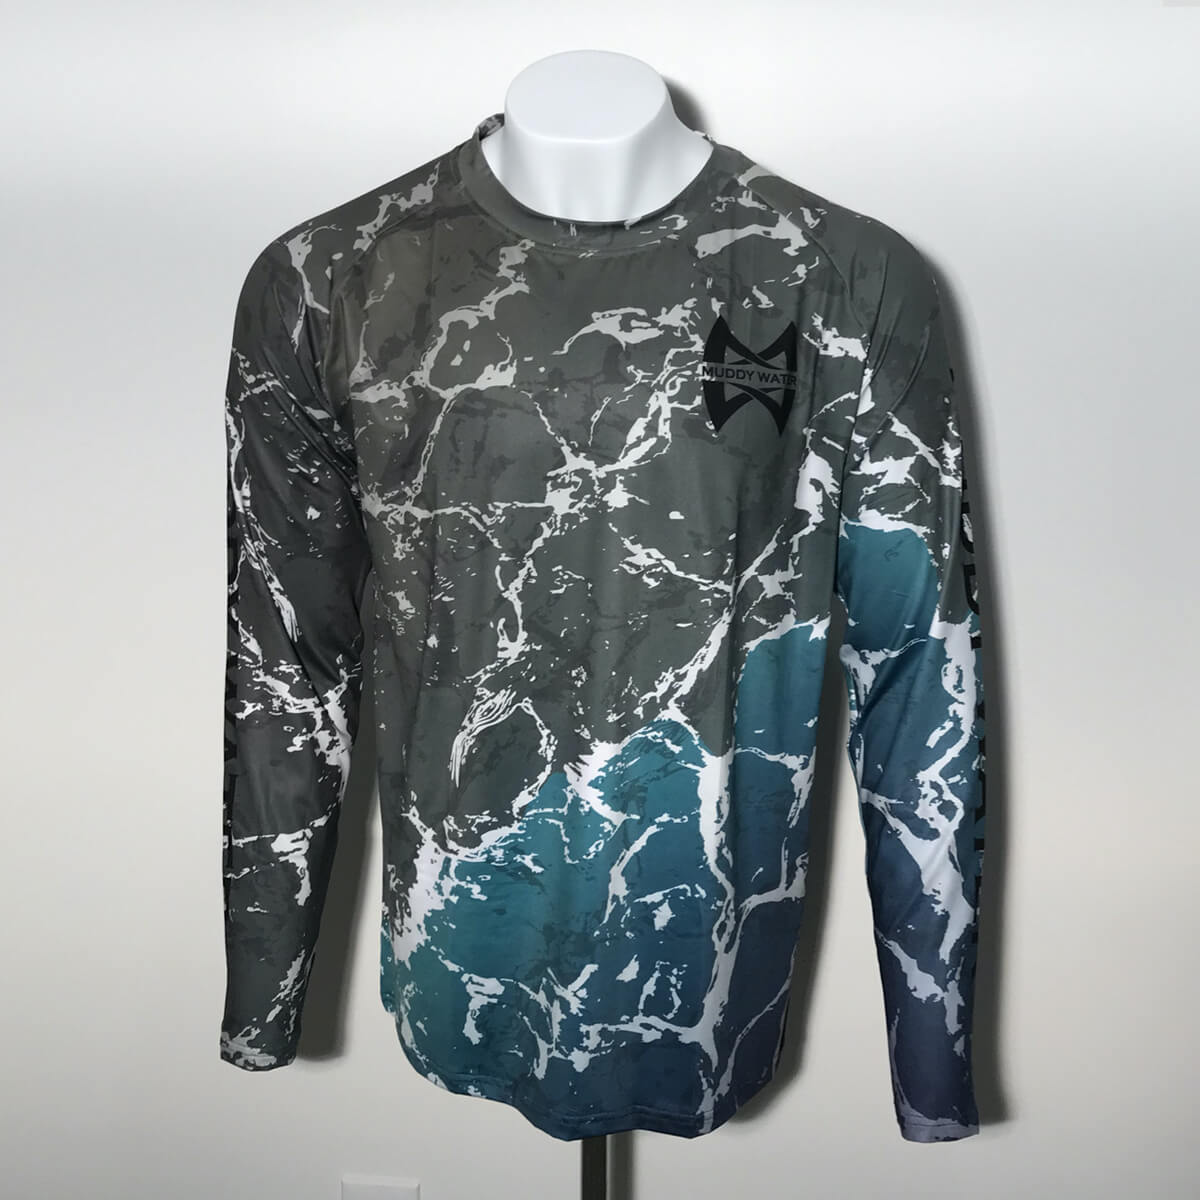 MERGE Limited Edition Fishing Shirt - Muddy Water Outdoors